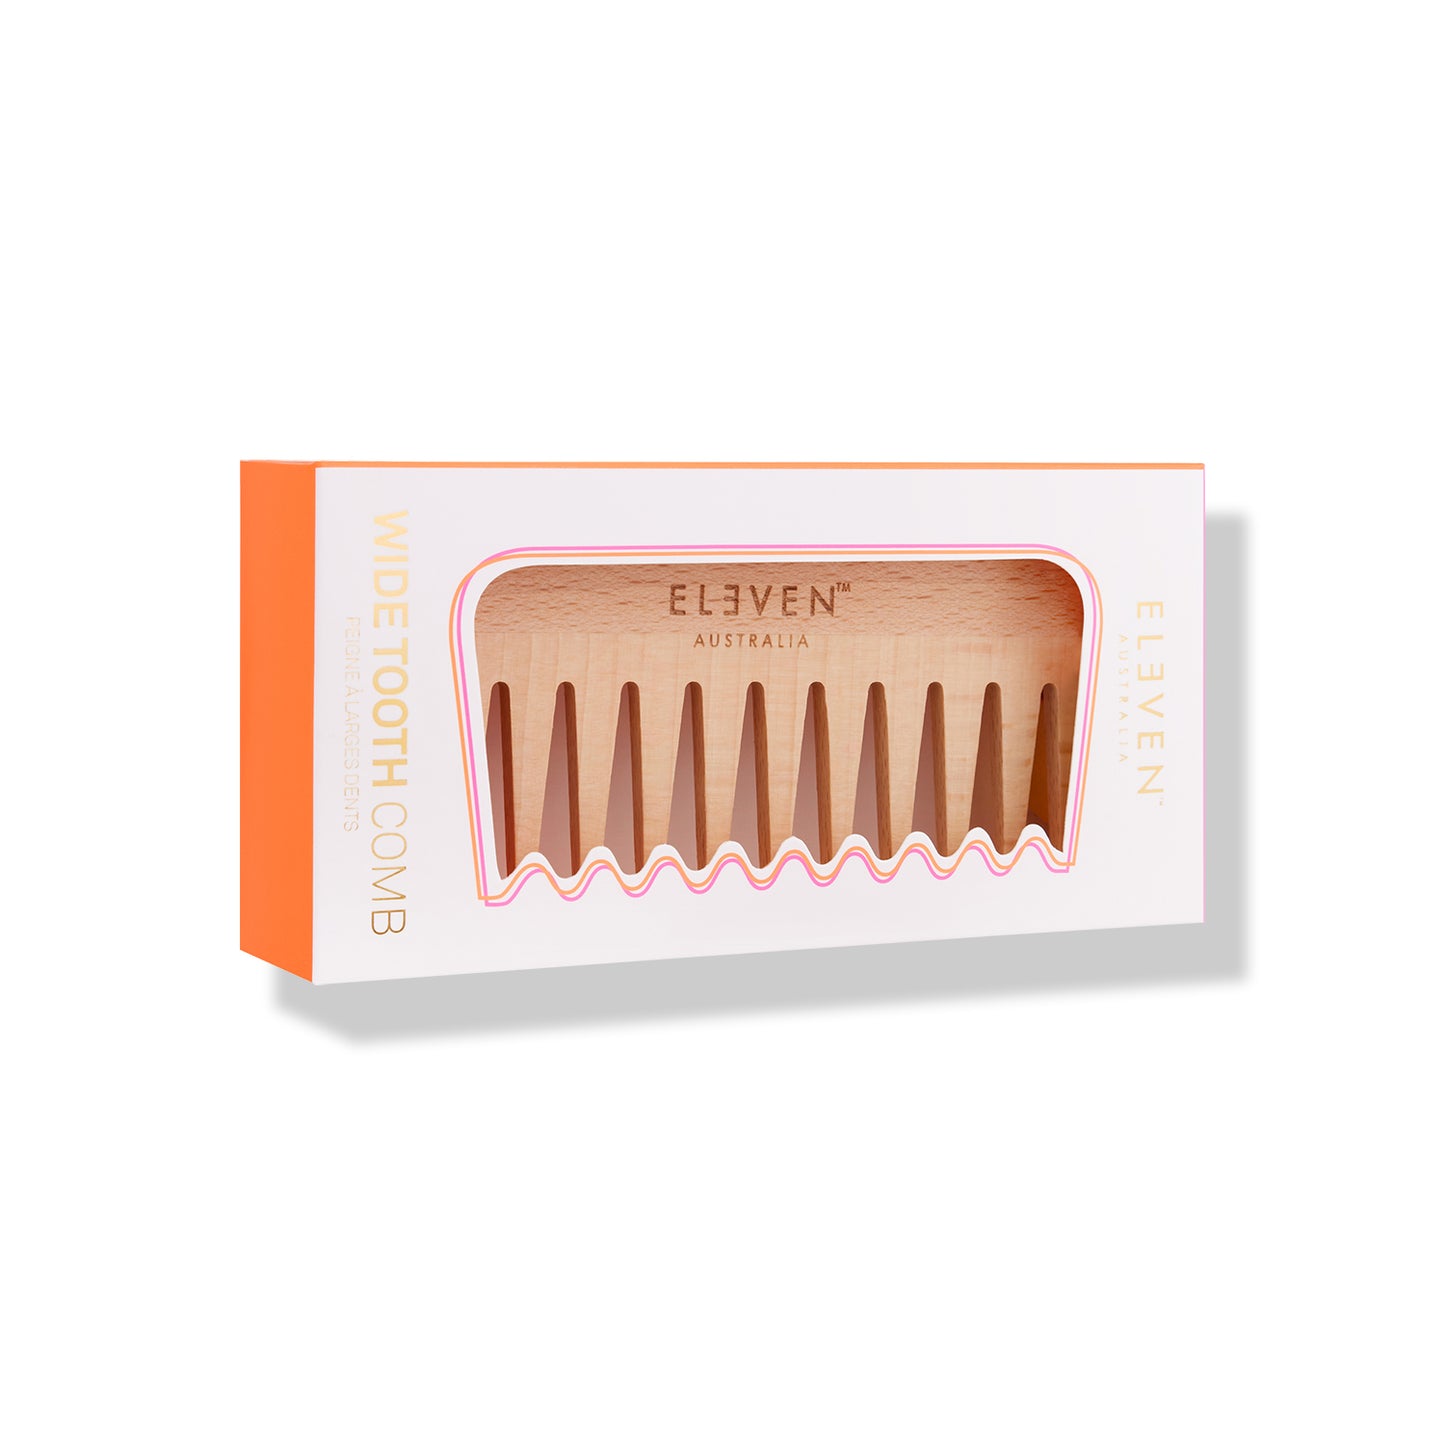 WOODEN WIDE TOOTH COMB